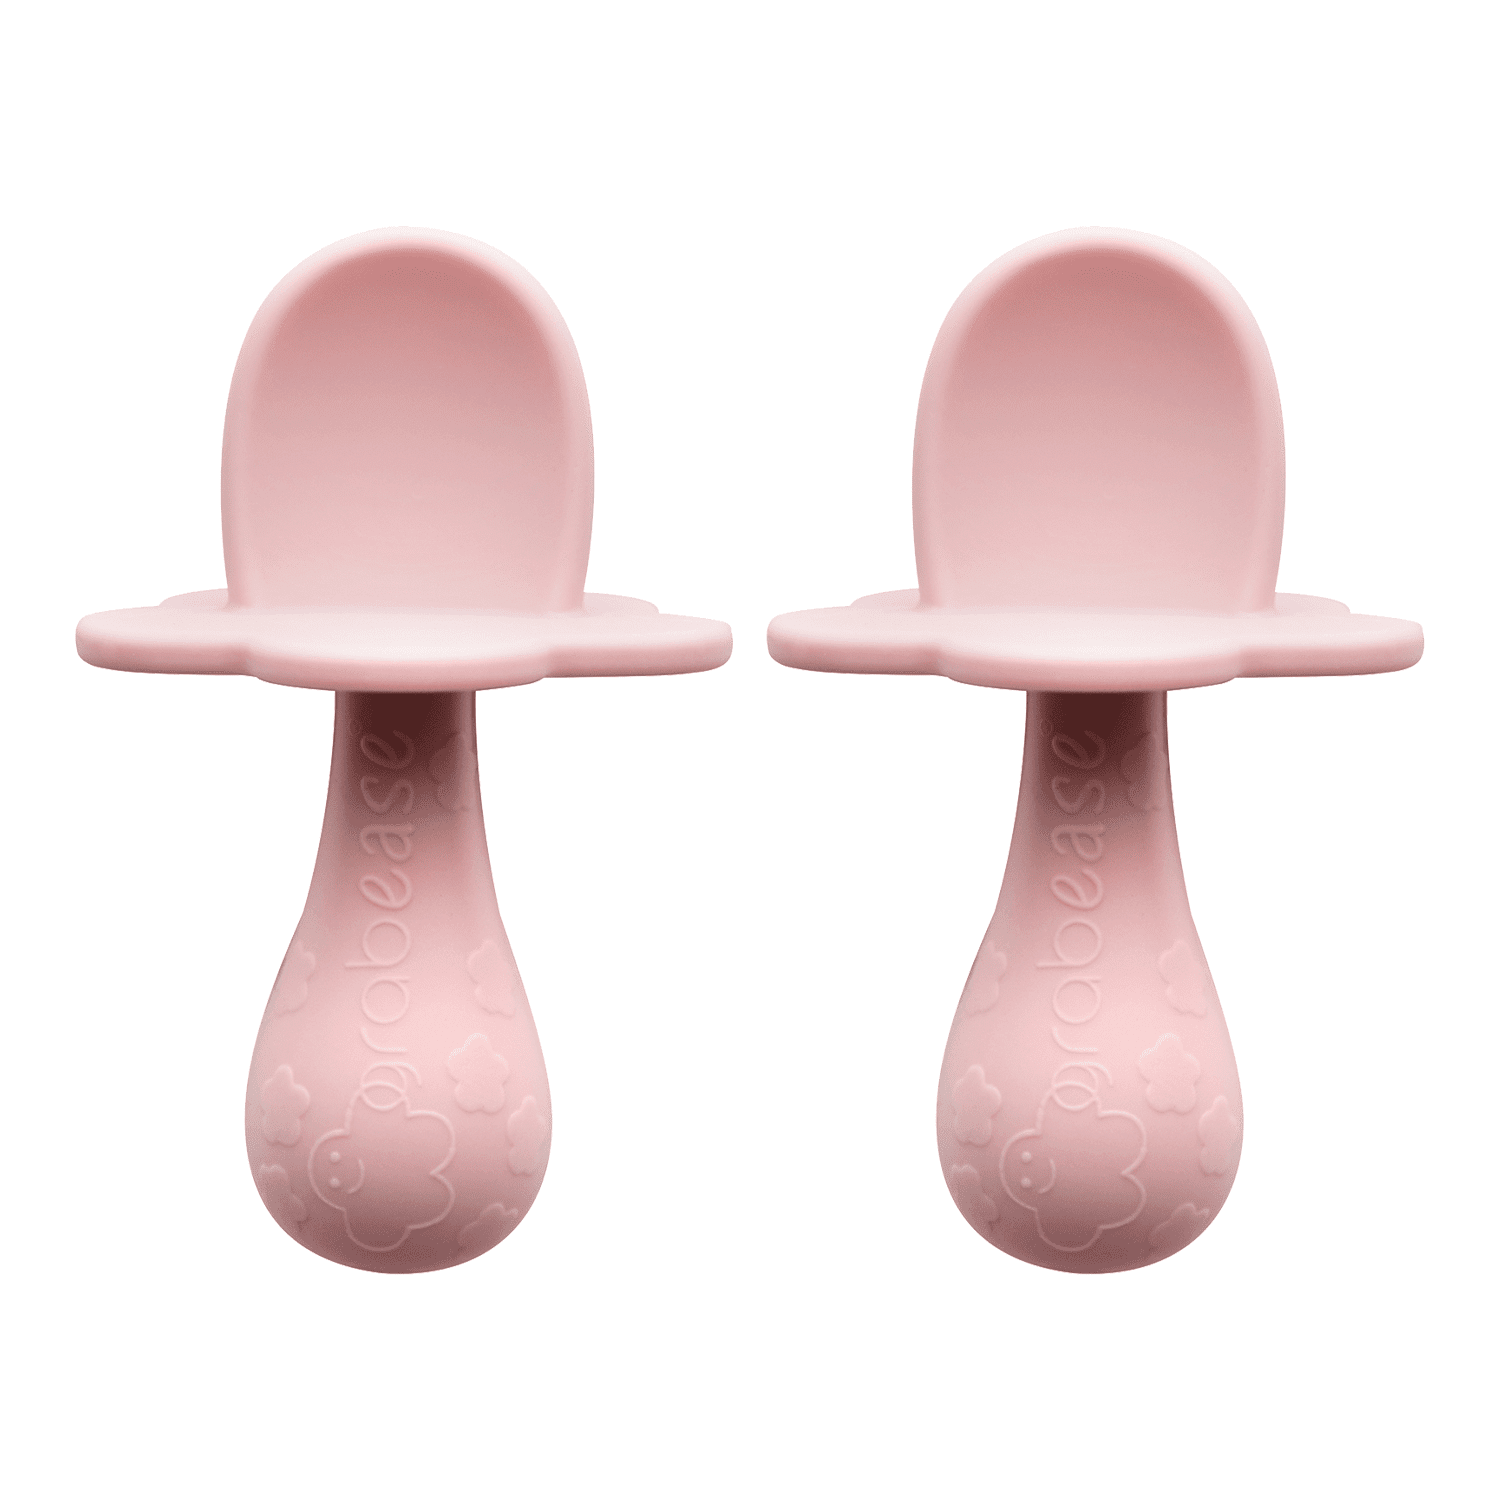 Grabease Stage 1 Double Silicone Baby Spoon Set